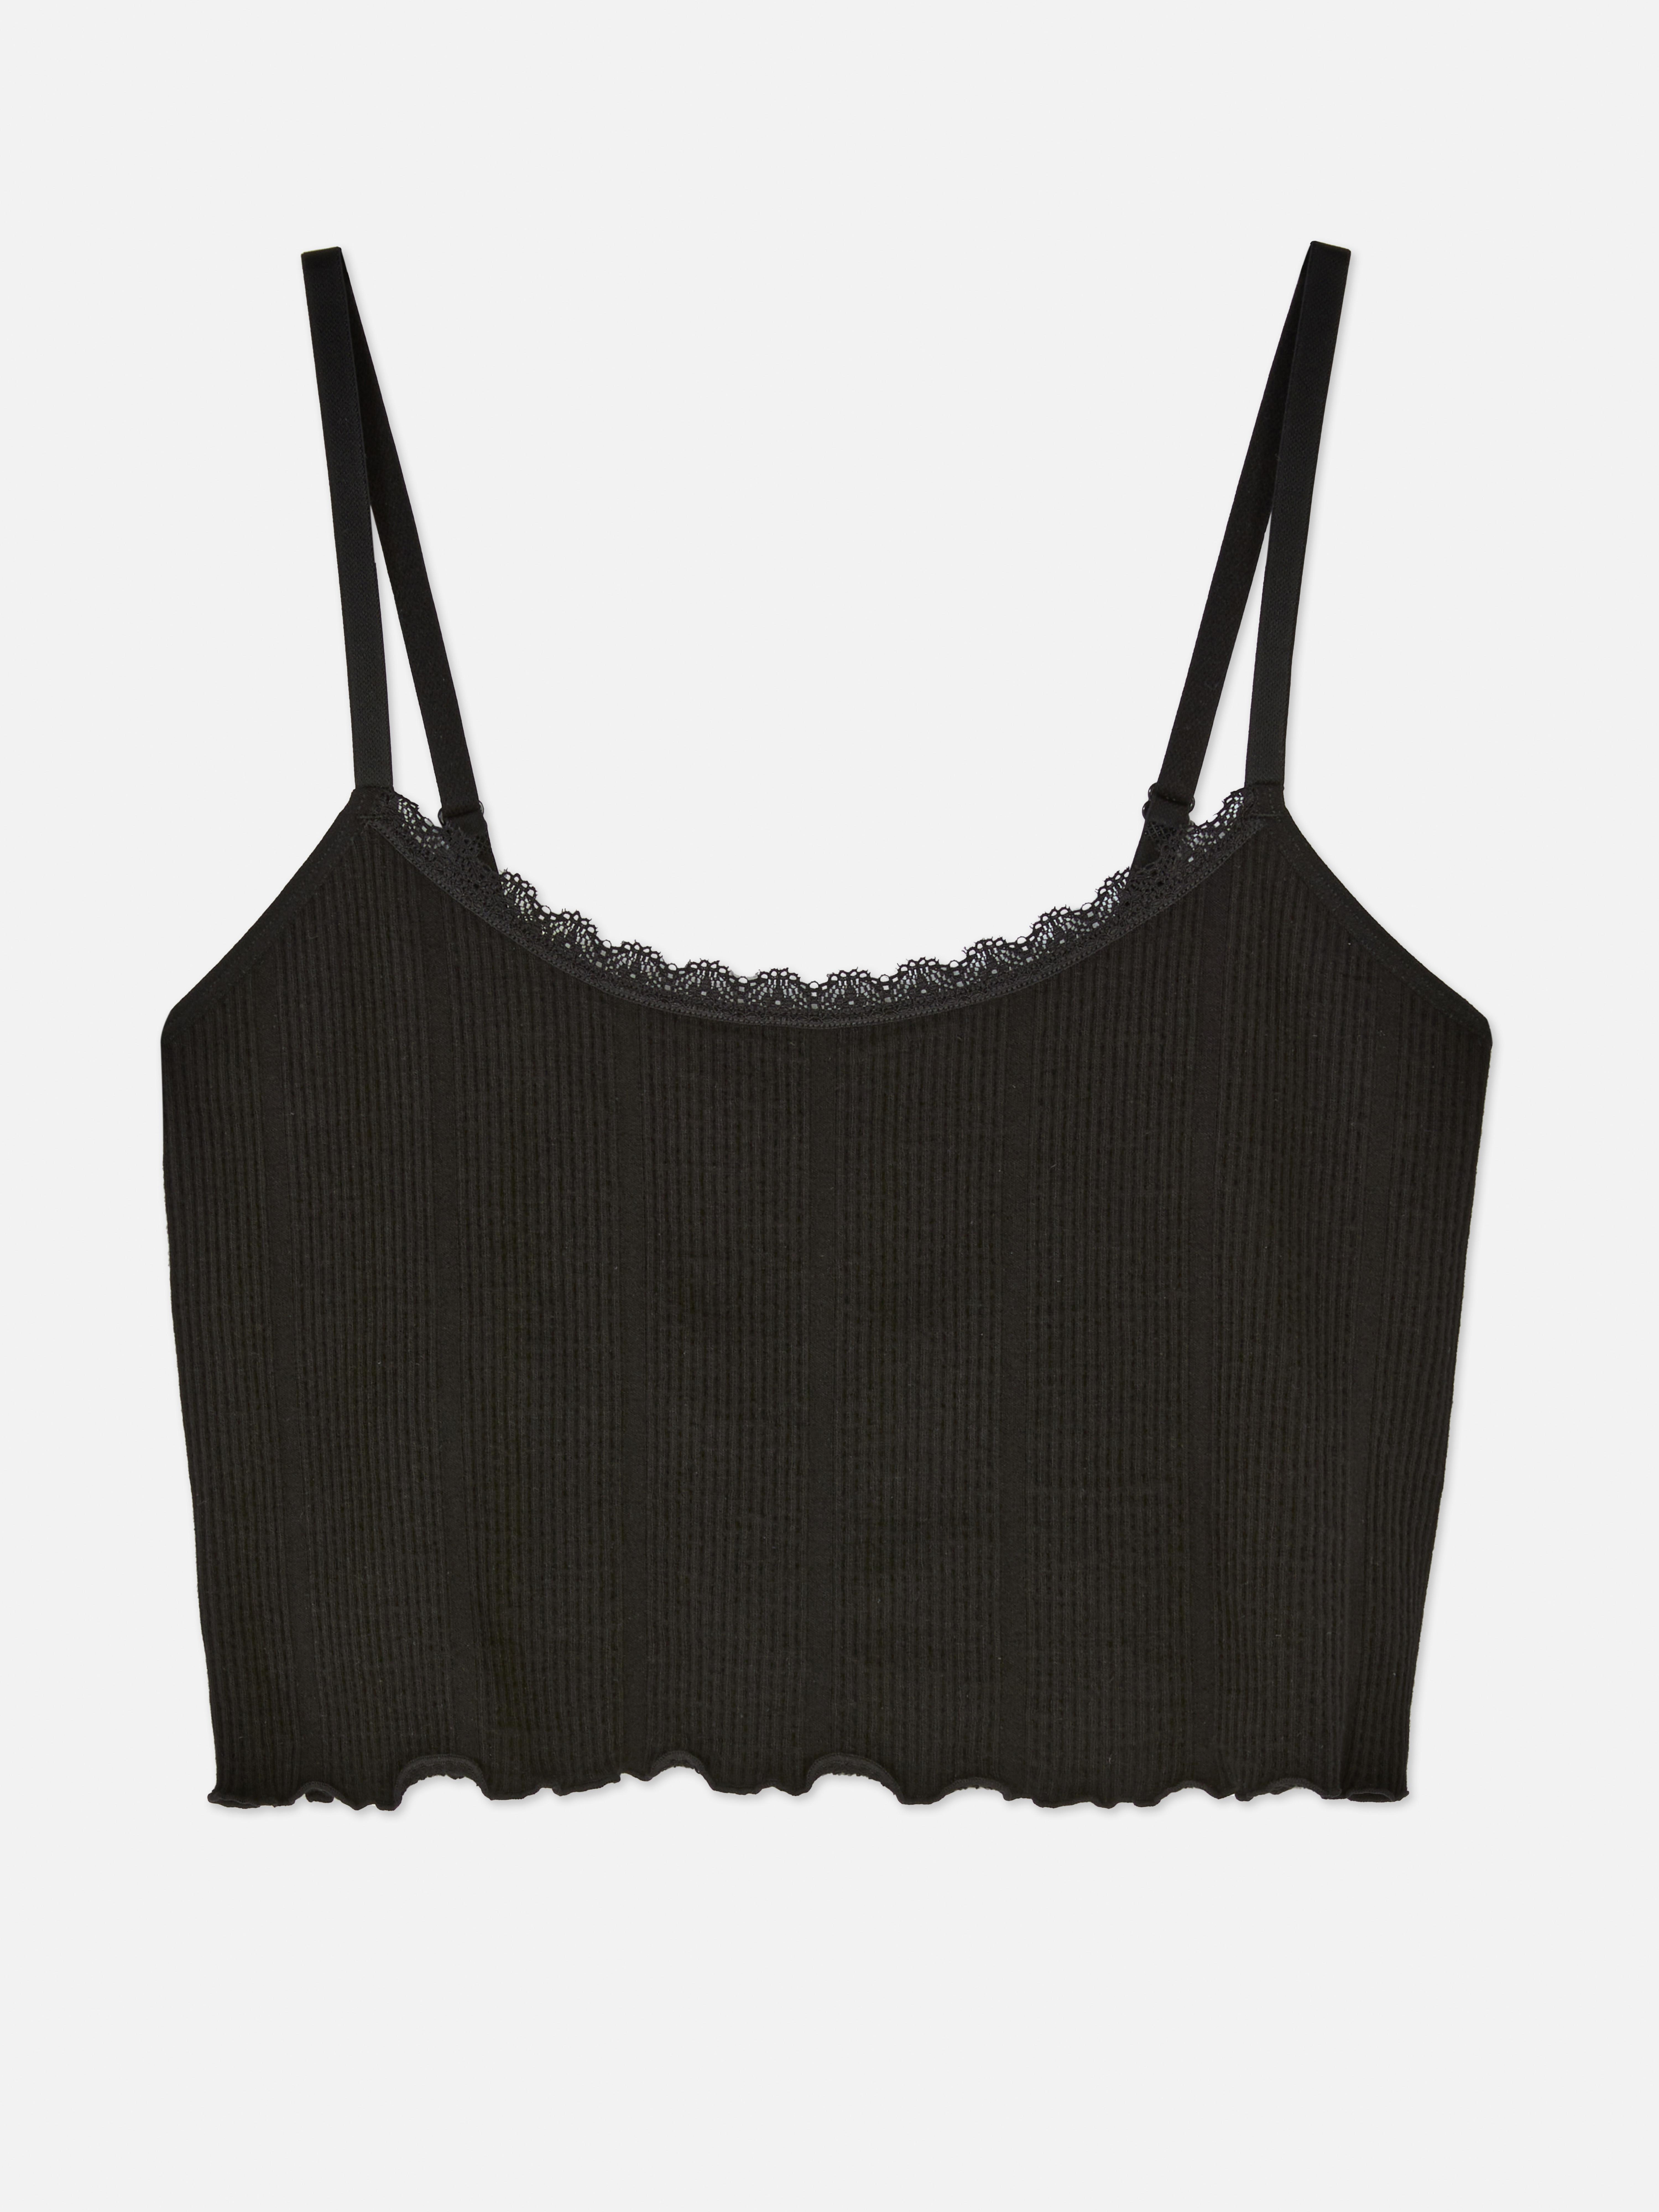 Primark Black Lace Bralette Crop Top Size 8 - $15 (62% Off Retail) - From  Kayla